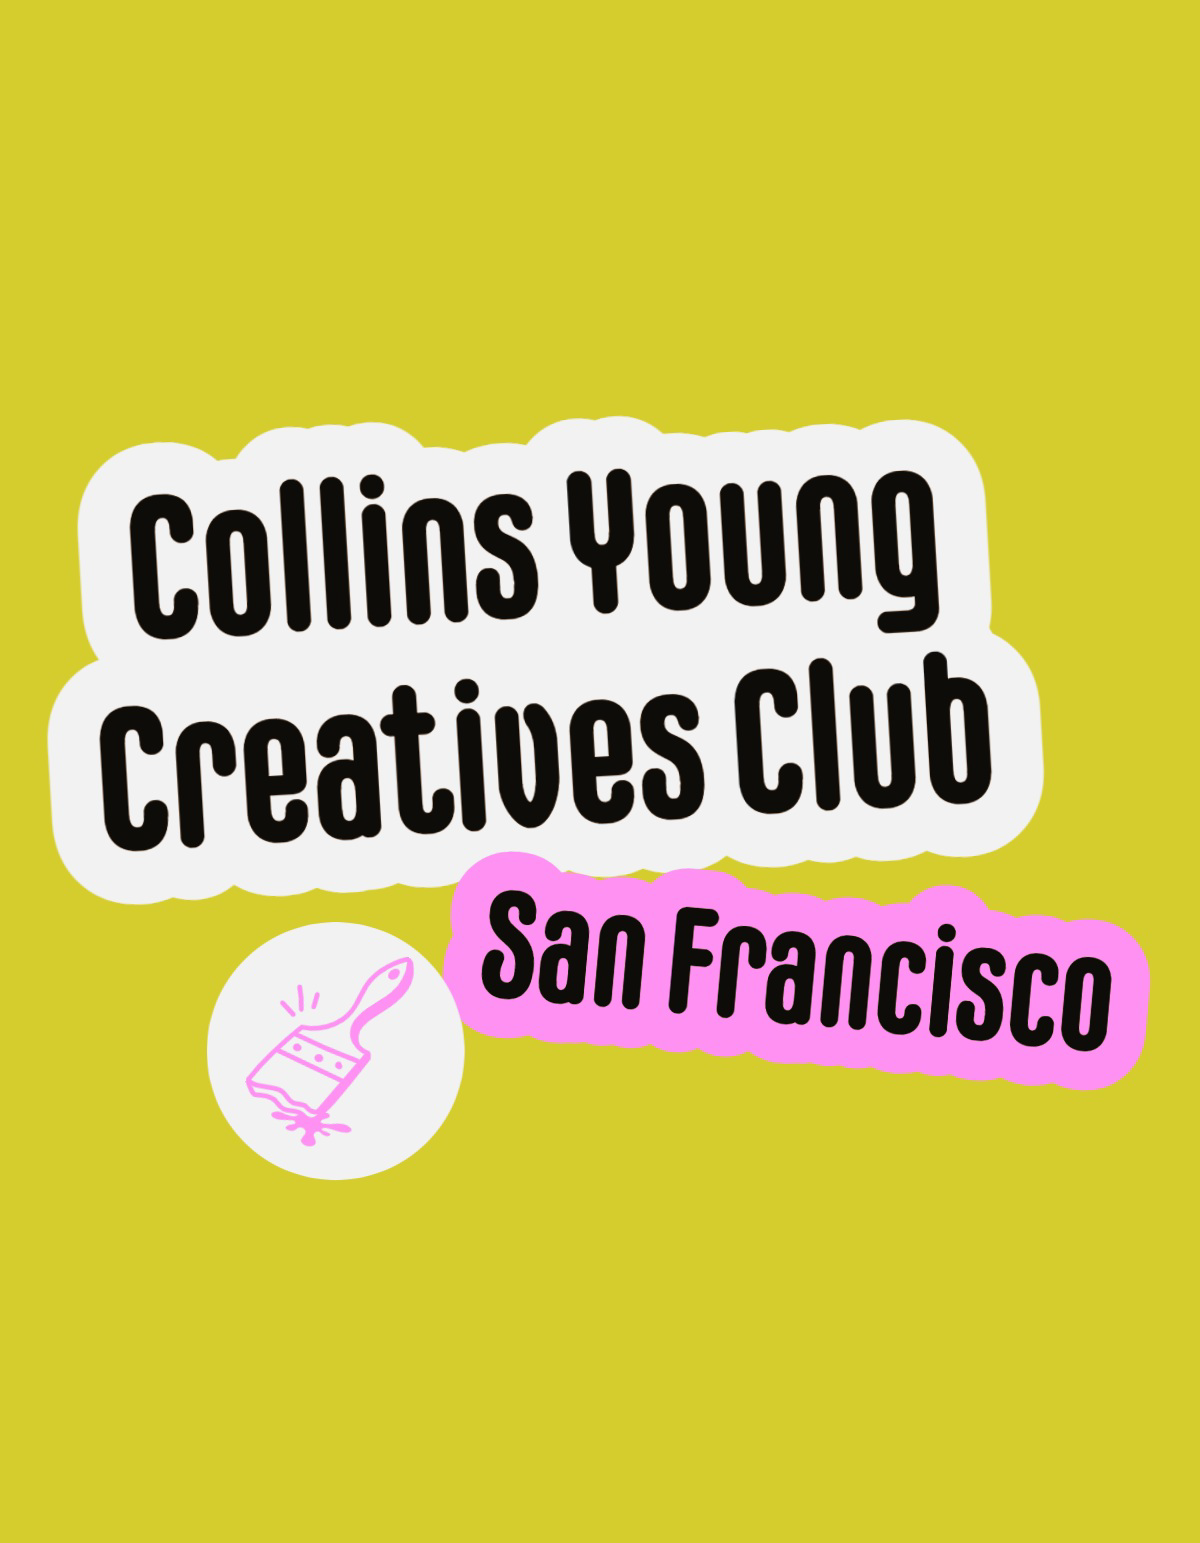 Collins young creatives club sticker - Where can you study to become a graphic designer in Ireland - Image 